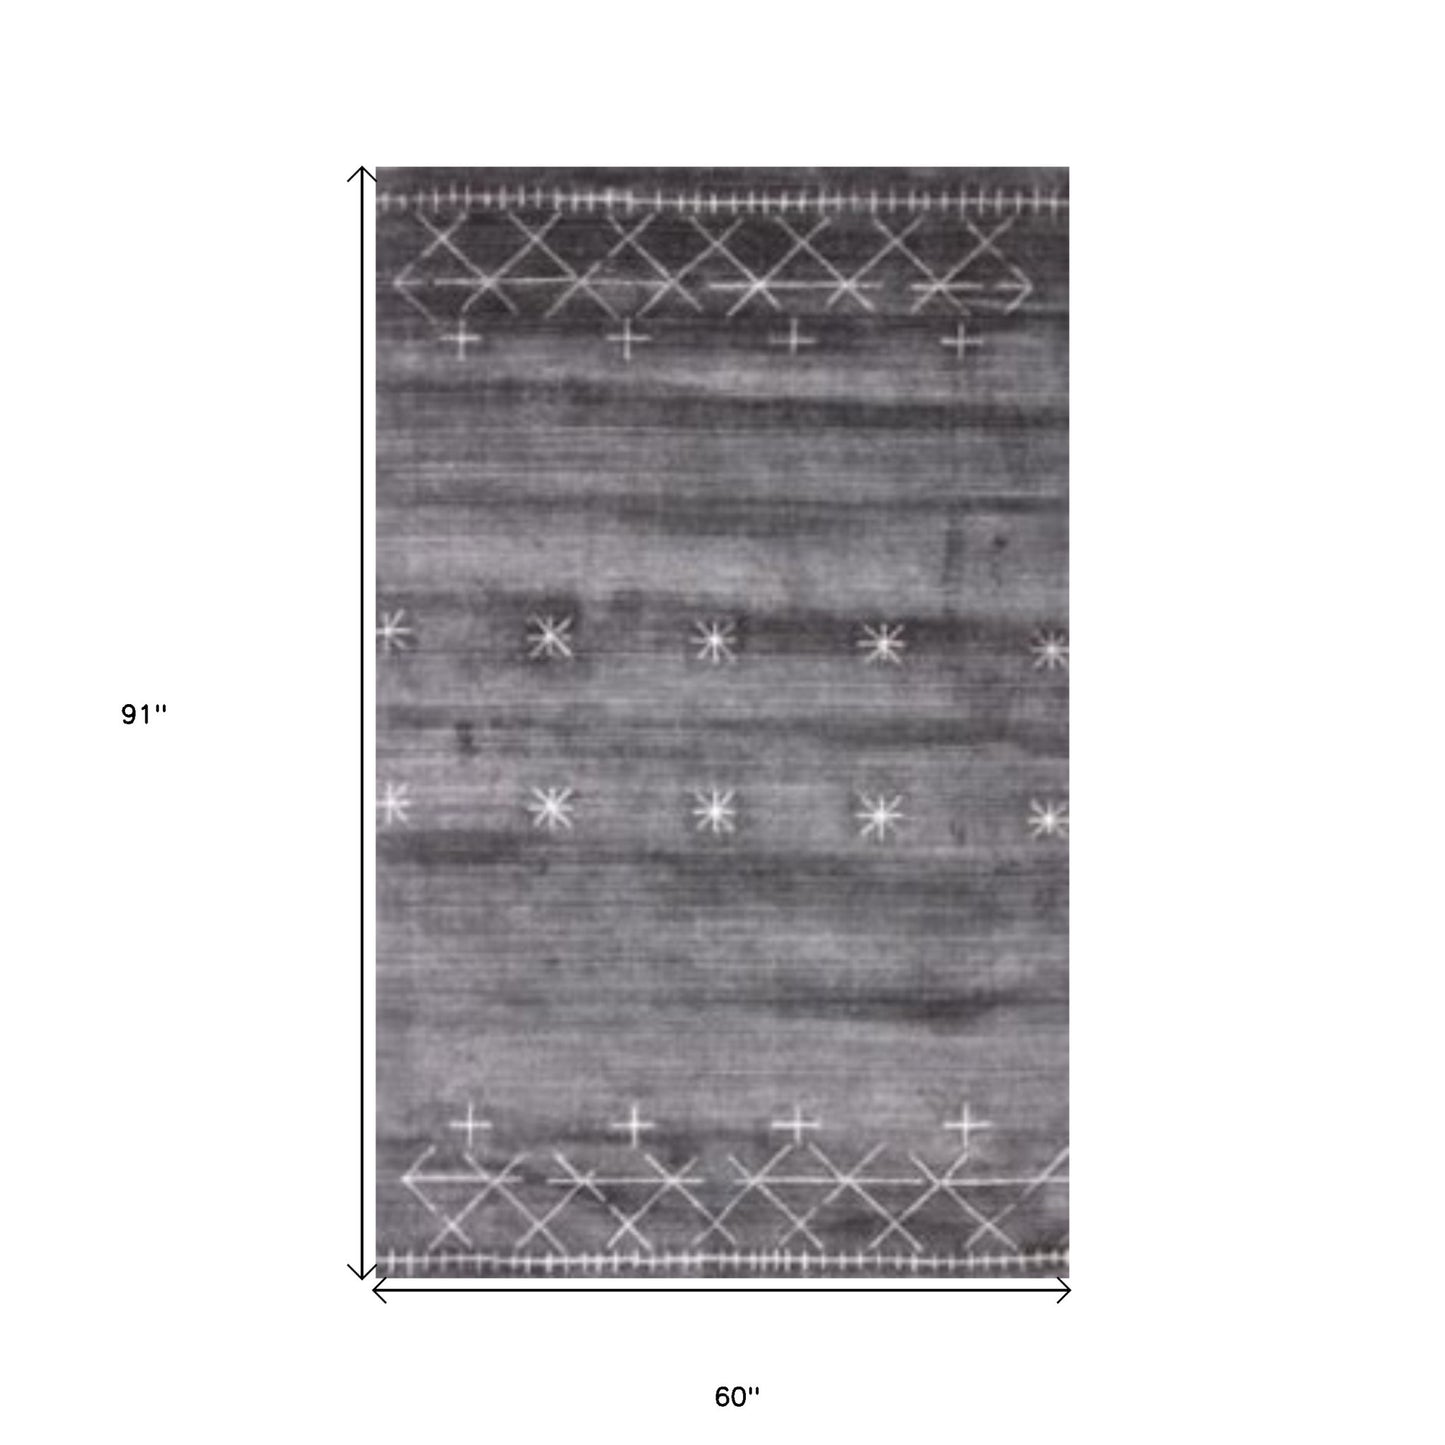 5' x 8' Black Gray and White Abstract Ombre with Stars Hand Loomed Area Rug